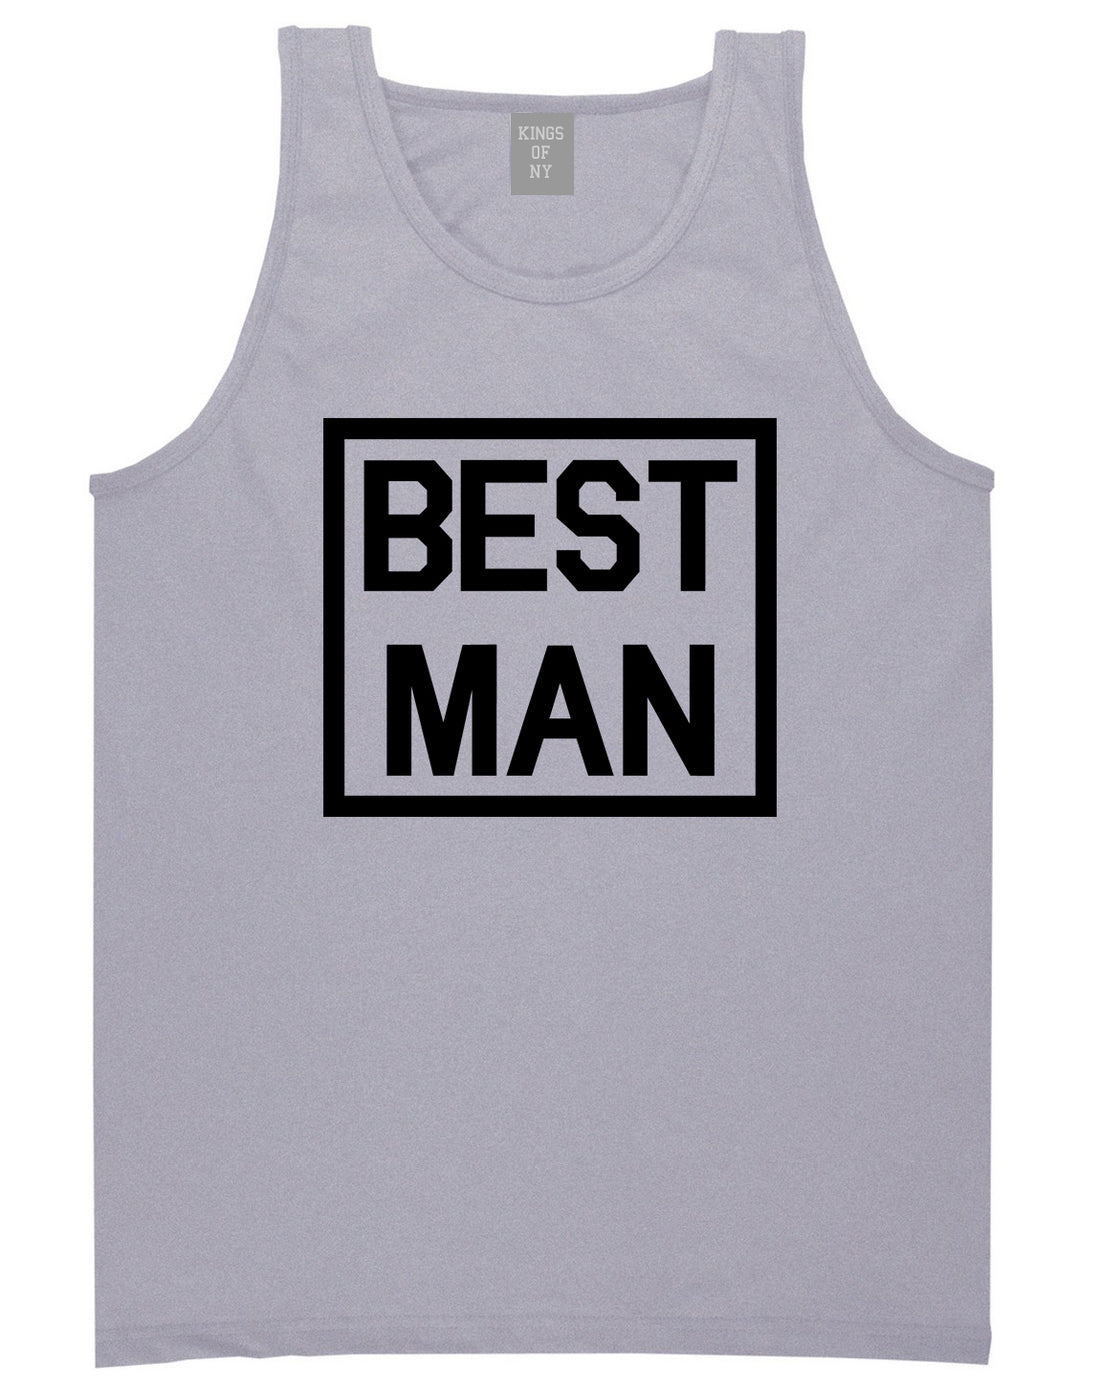 Best Man Bachelor Party Grey Tank Top Shirt by Kings Of NY